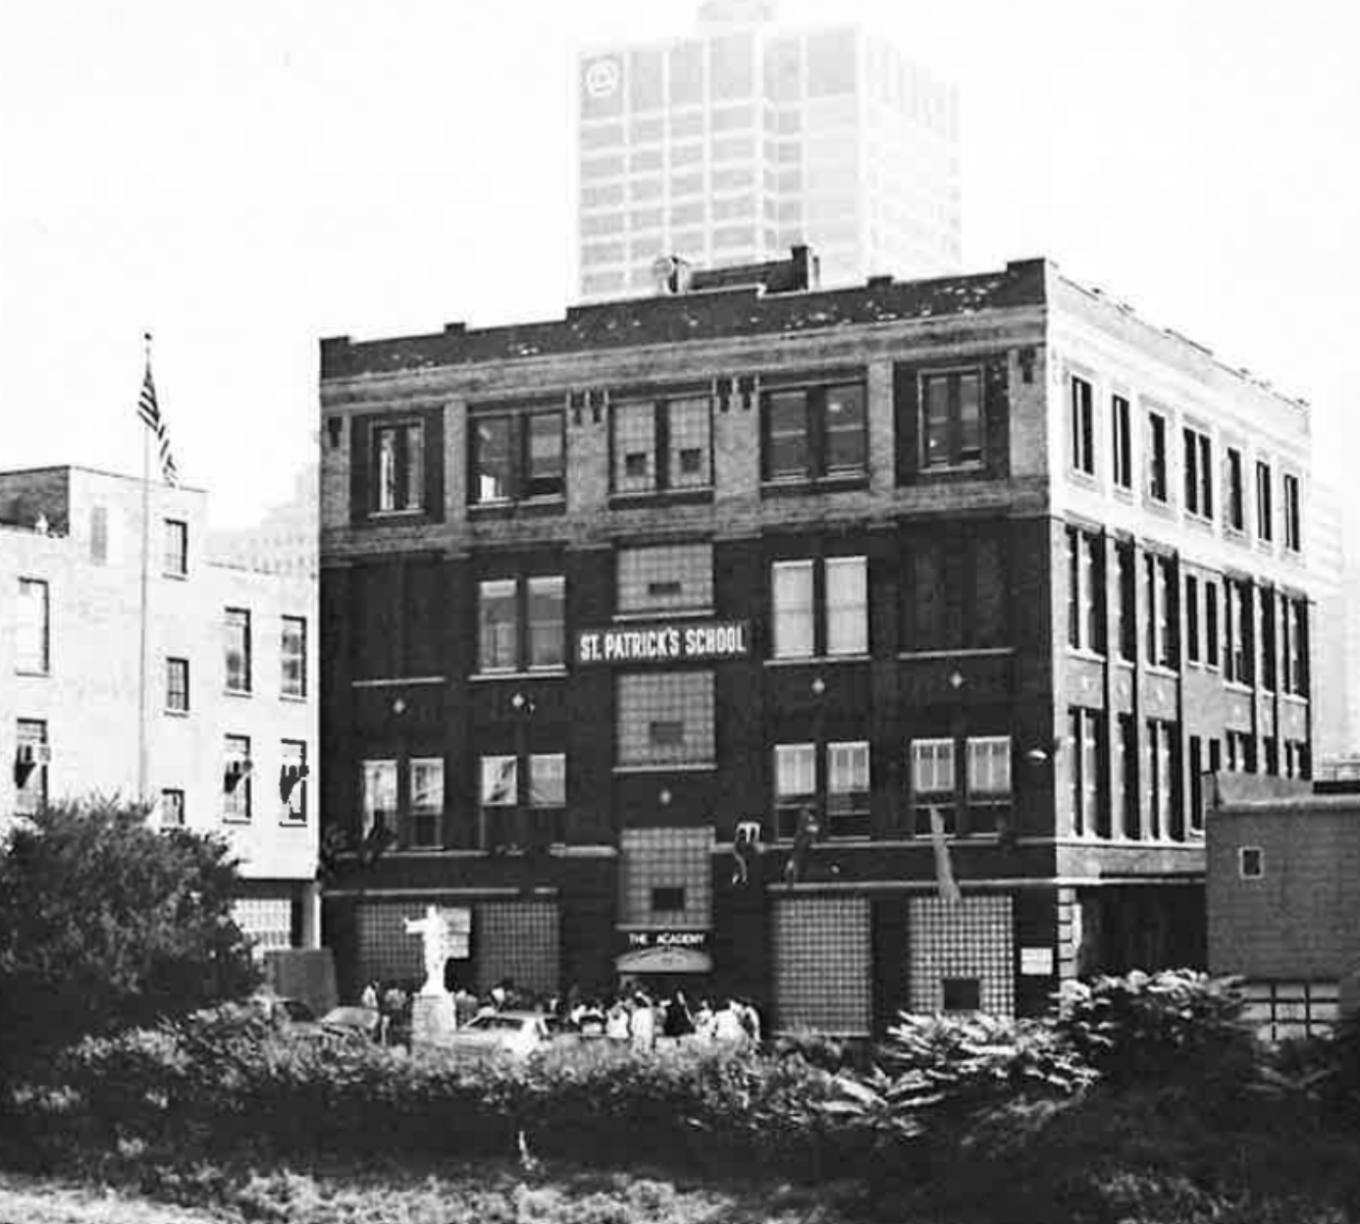 An image of the original Academy building, located at 718 West Adams Street.